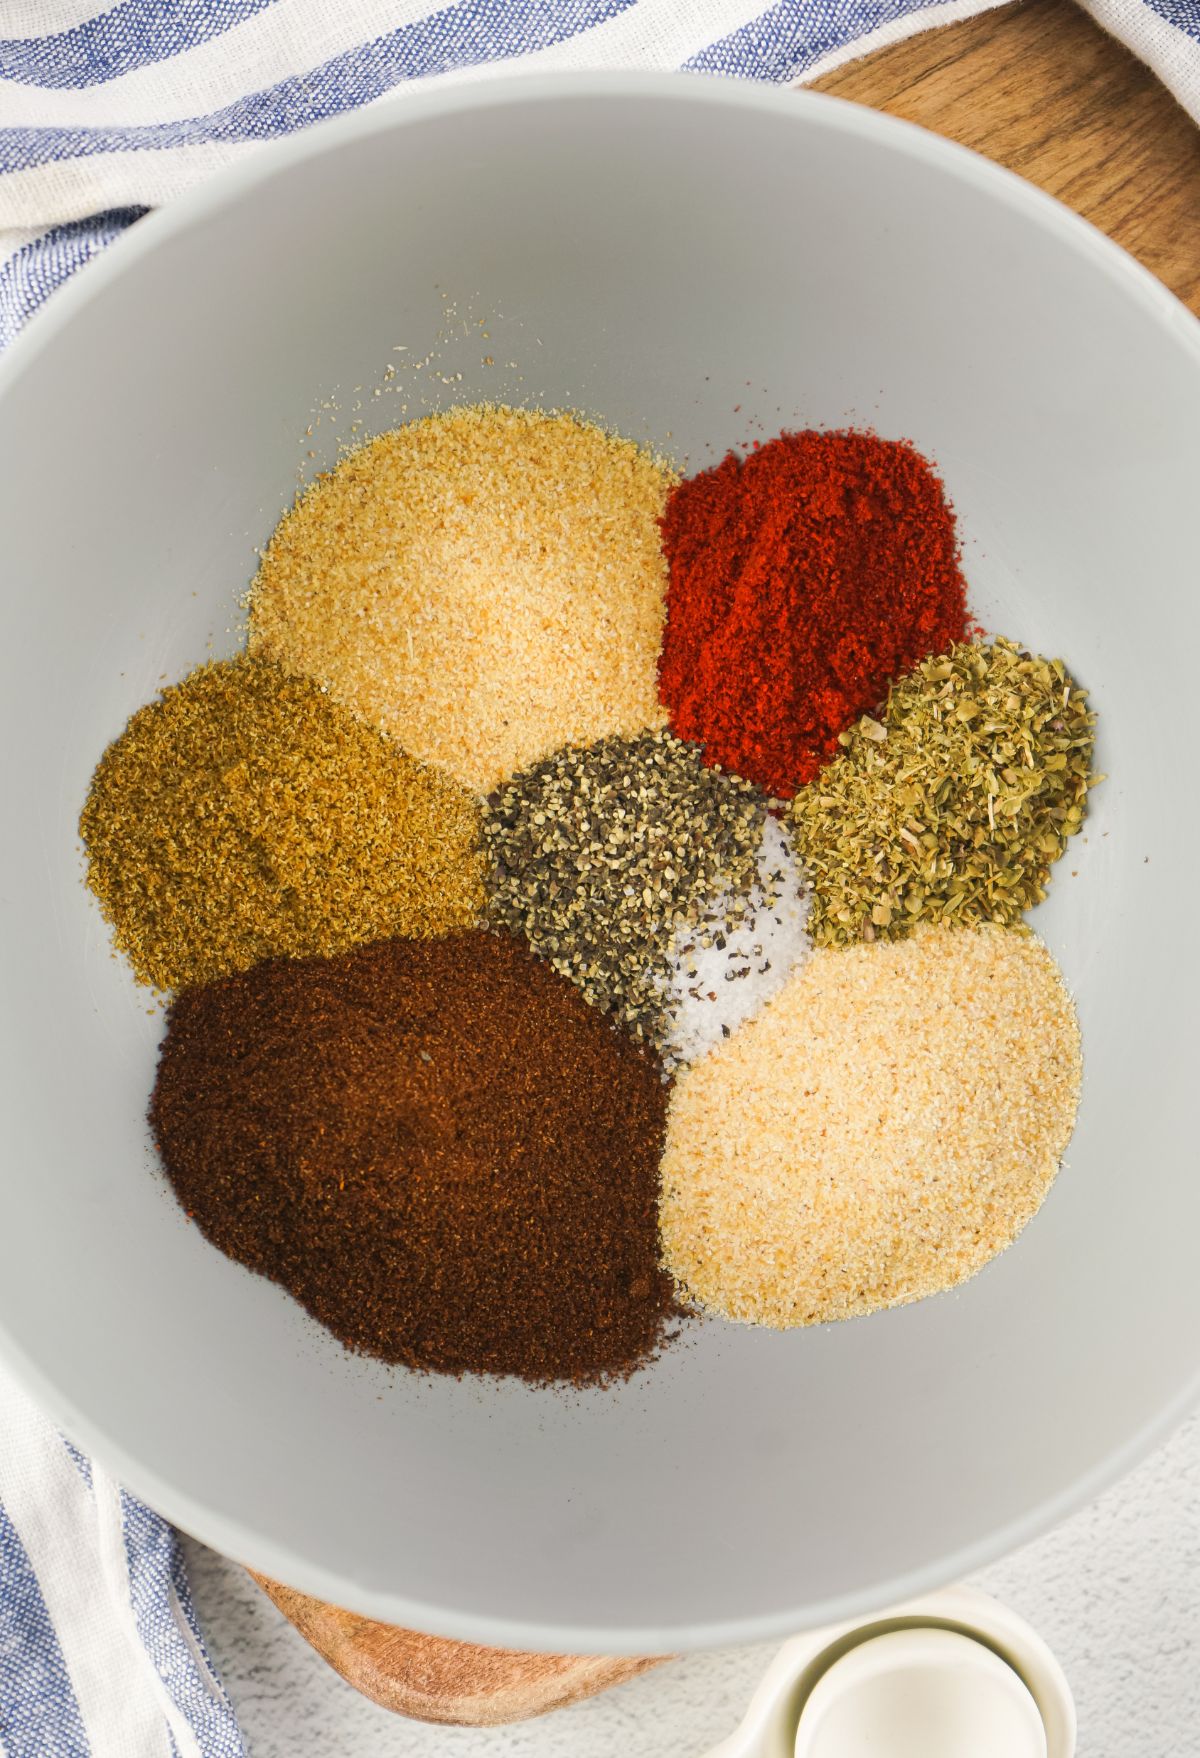 A bowl of spices and seasonings on a wooden cutting board.